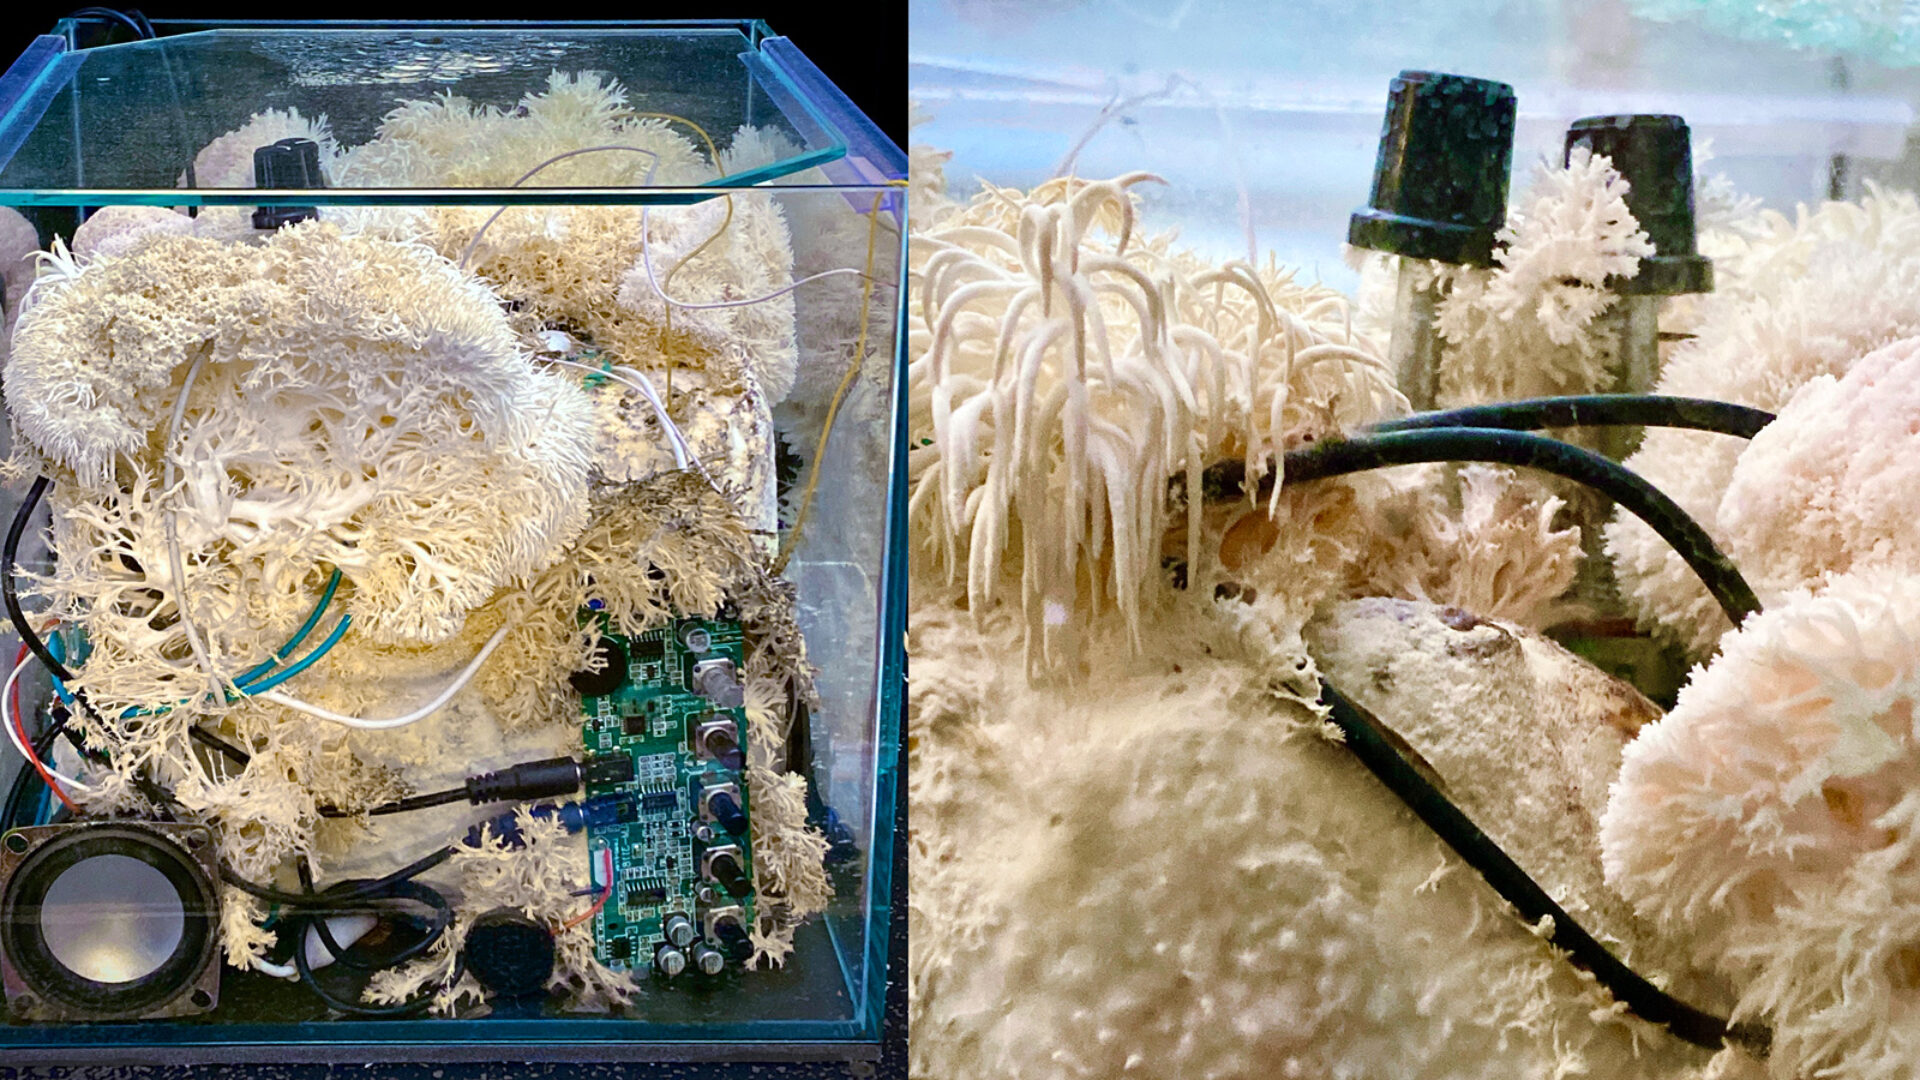 An image from Chris Henschke showing work-in-progress from their exhibition work. A photograph of mycelium growing combined with electronic apparatus.